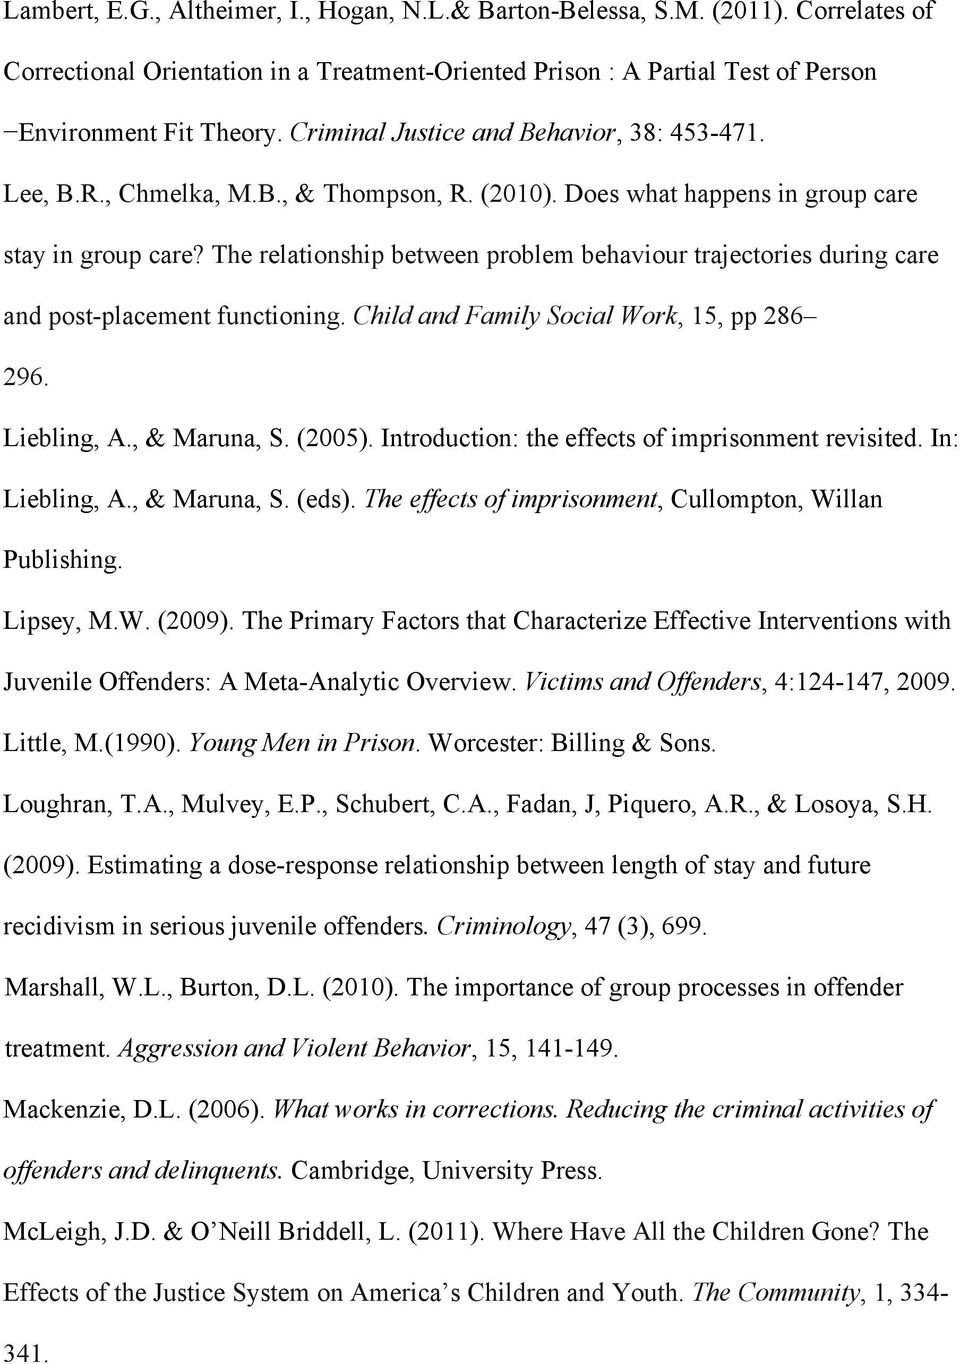 The relationship between problem behaviour trajectories during care and post-placement functioning..child and Family Social Work, 15, pp 286 296.69286..29 Liebling, A., & Maruna, S. (2005).